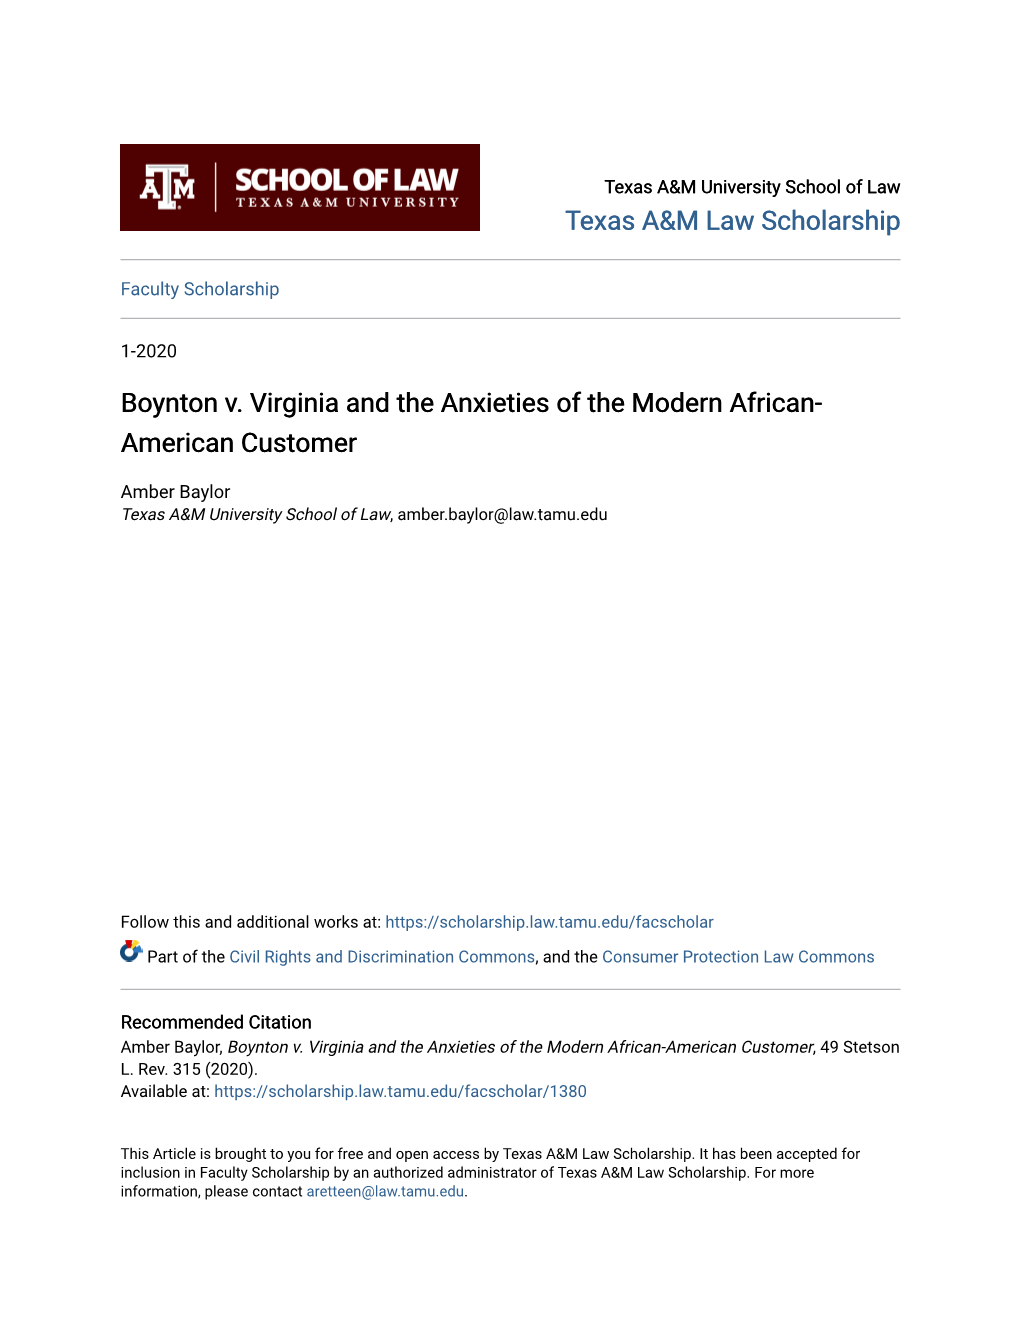 Boynton V. Virginia and the Anxieties of the Modern African-American Customer, 49 Stetson L